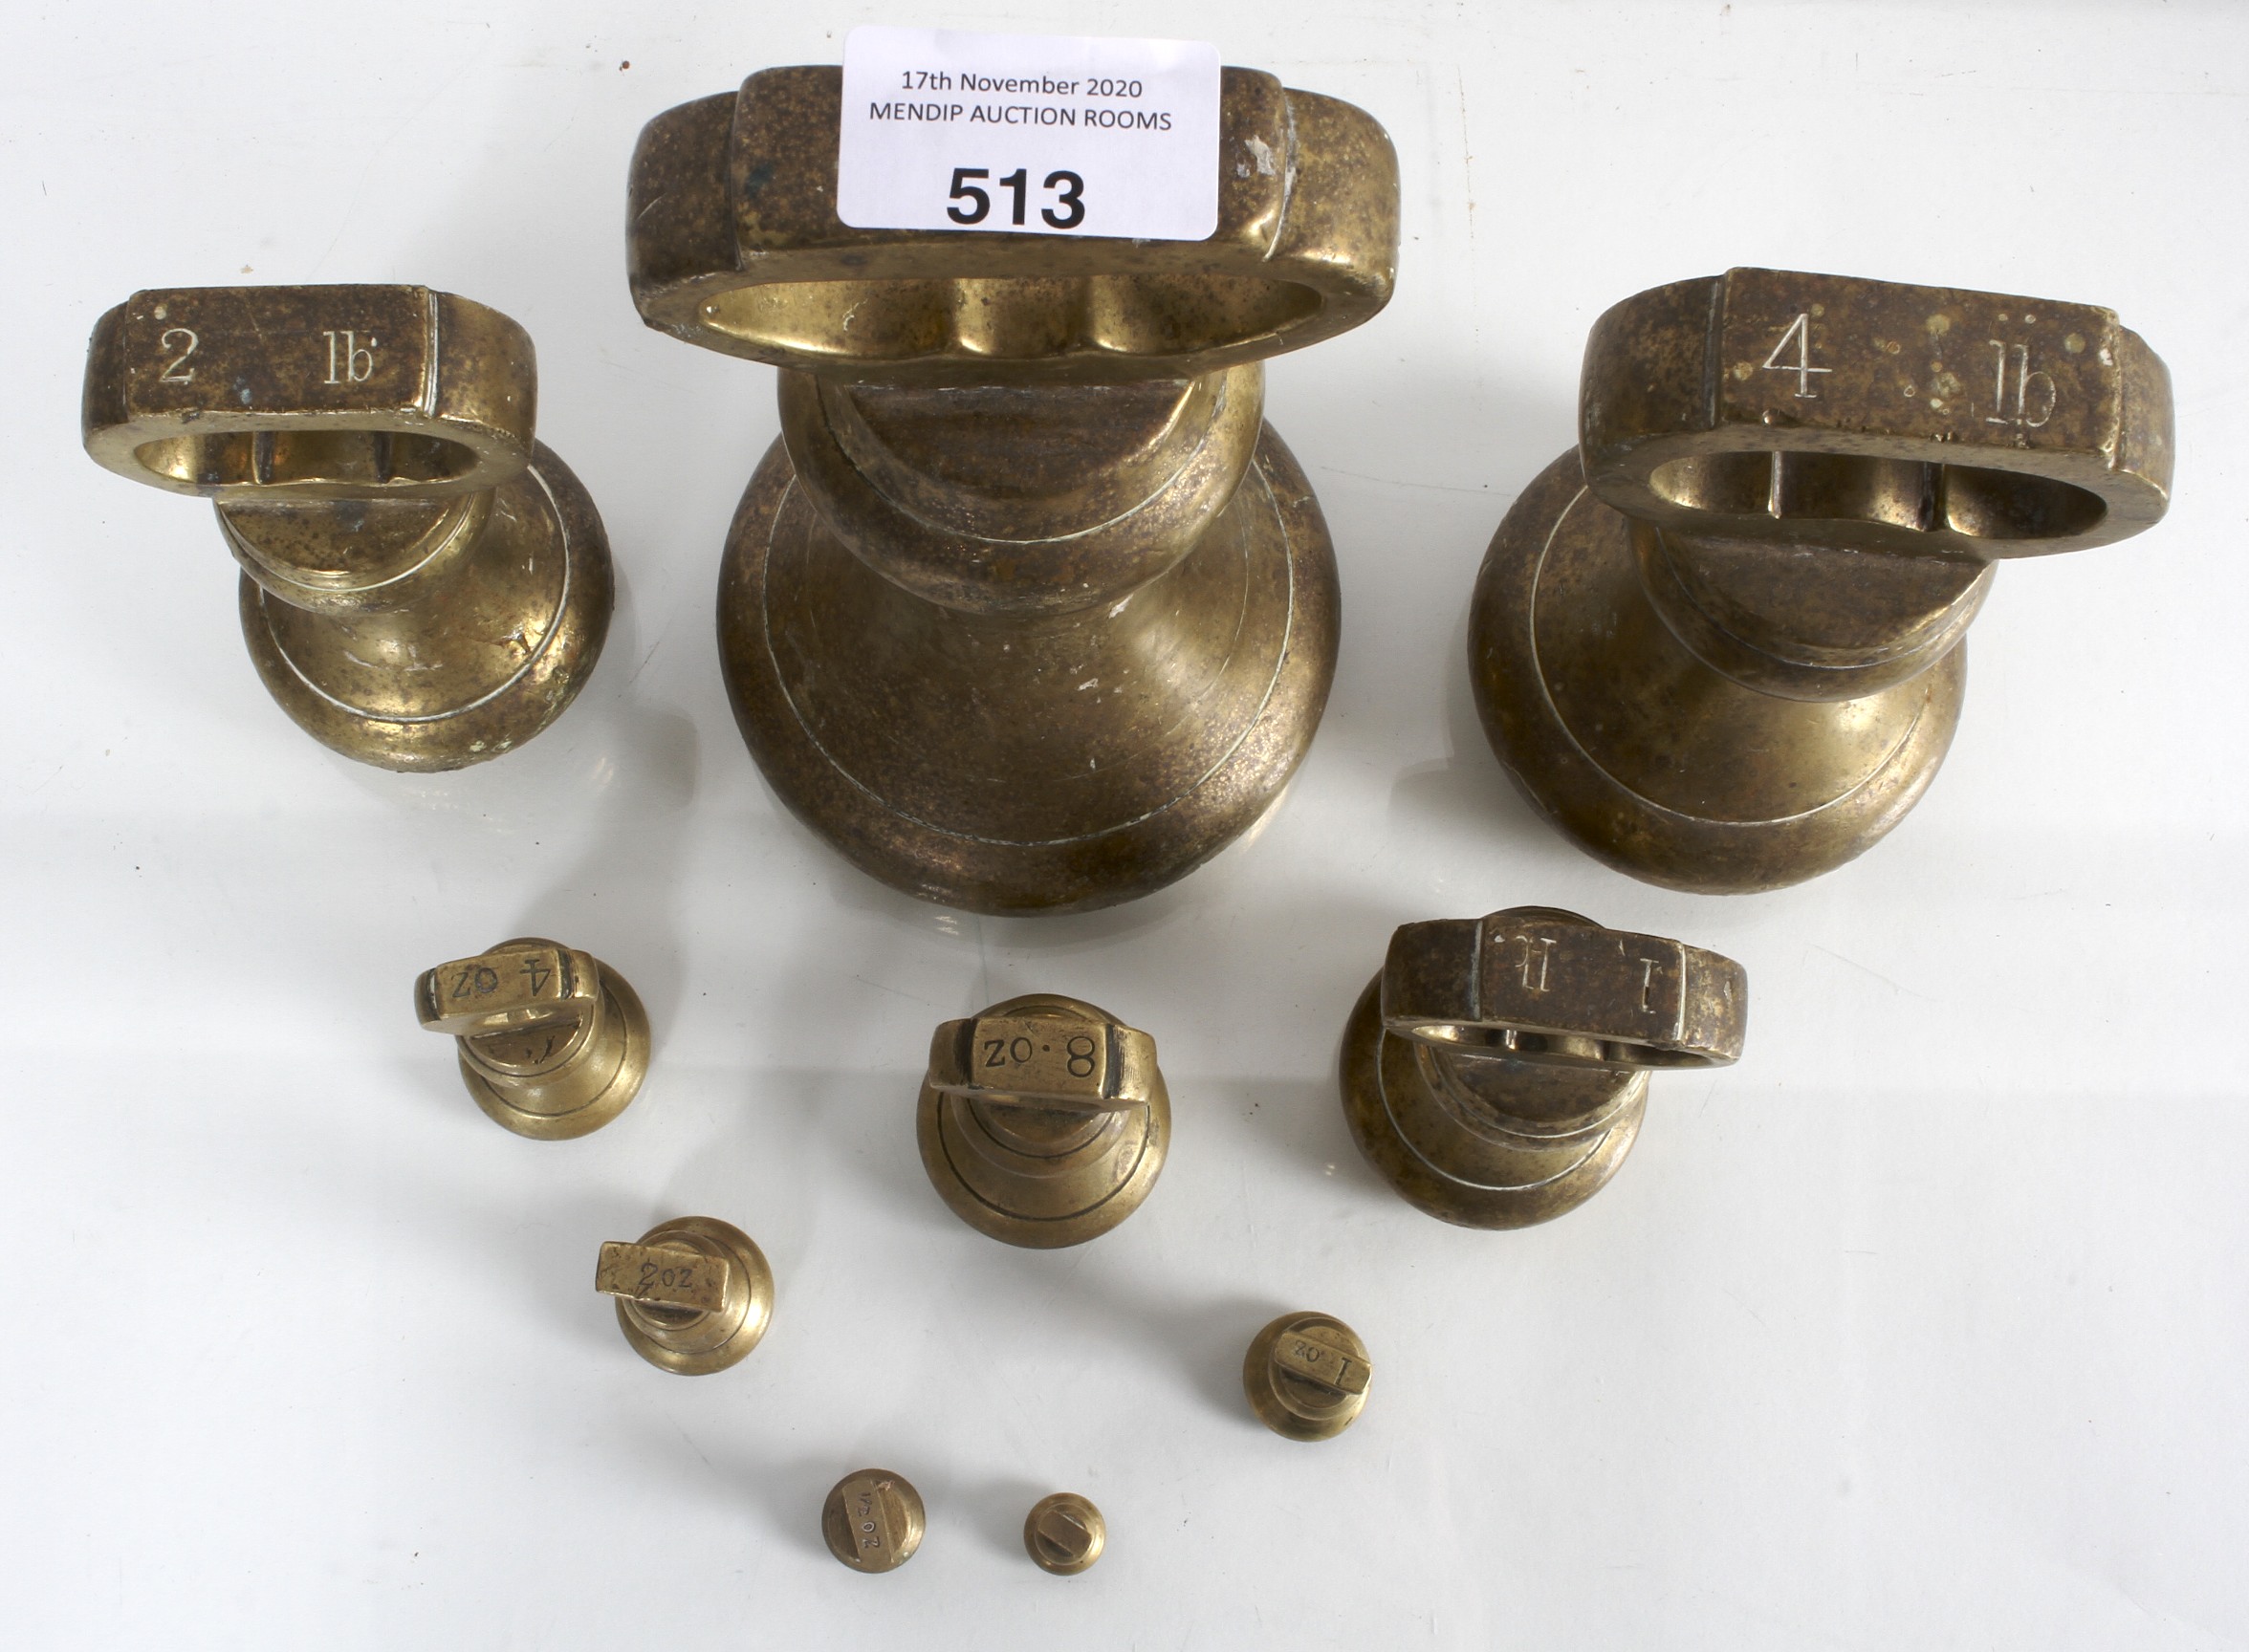 A set of nine vintage graduating brass bell weights ranging from 7lbs to 1/4oz, largest marked EIIR. - Image 2 of 2